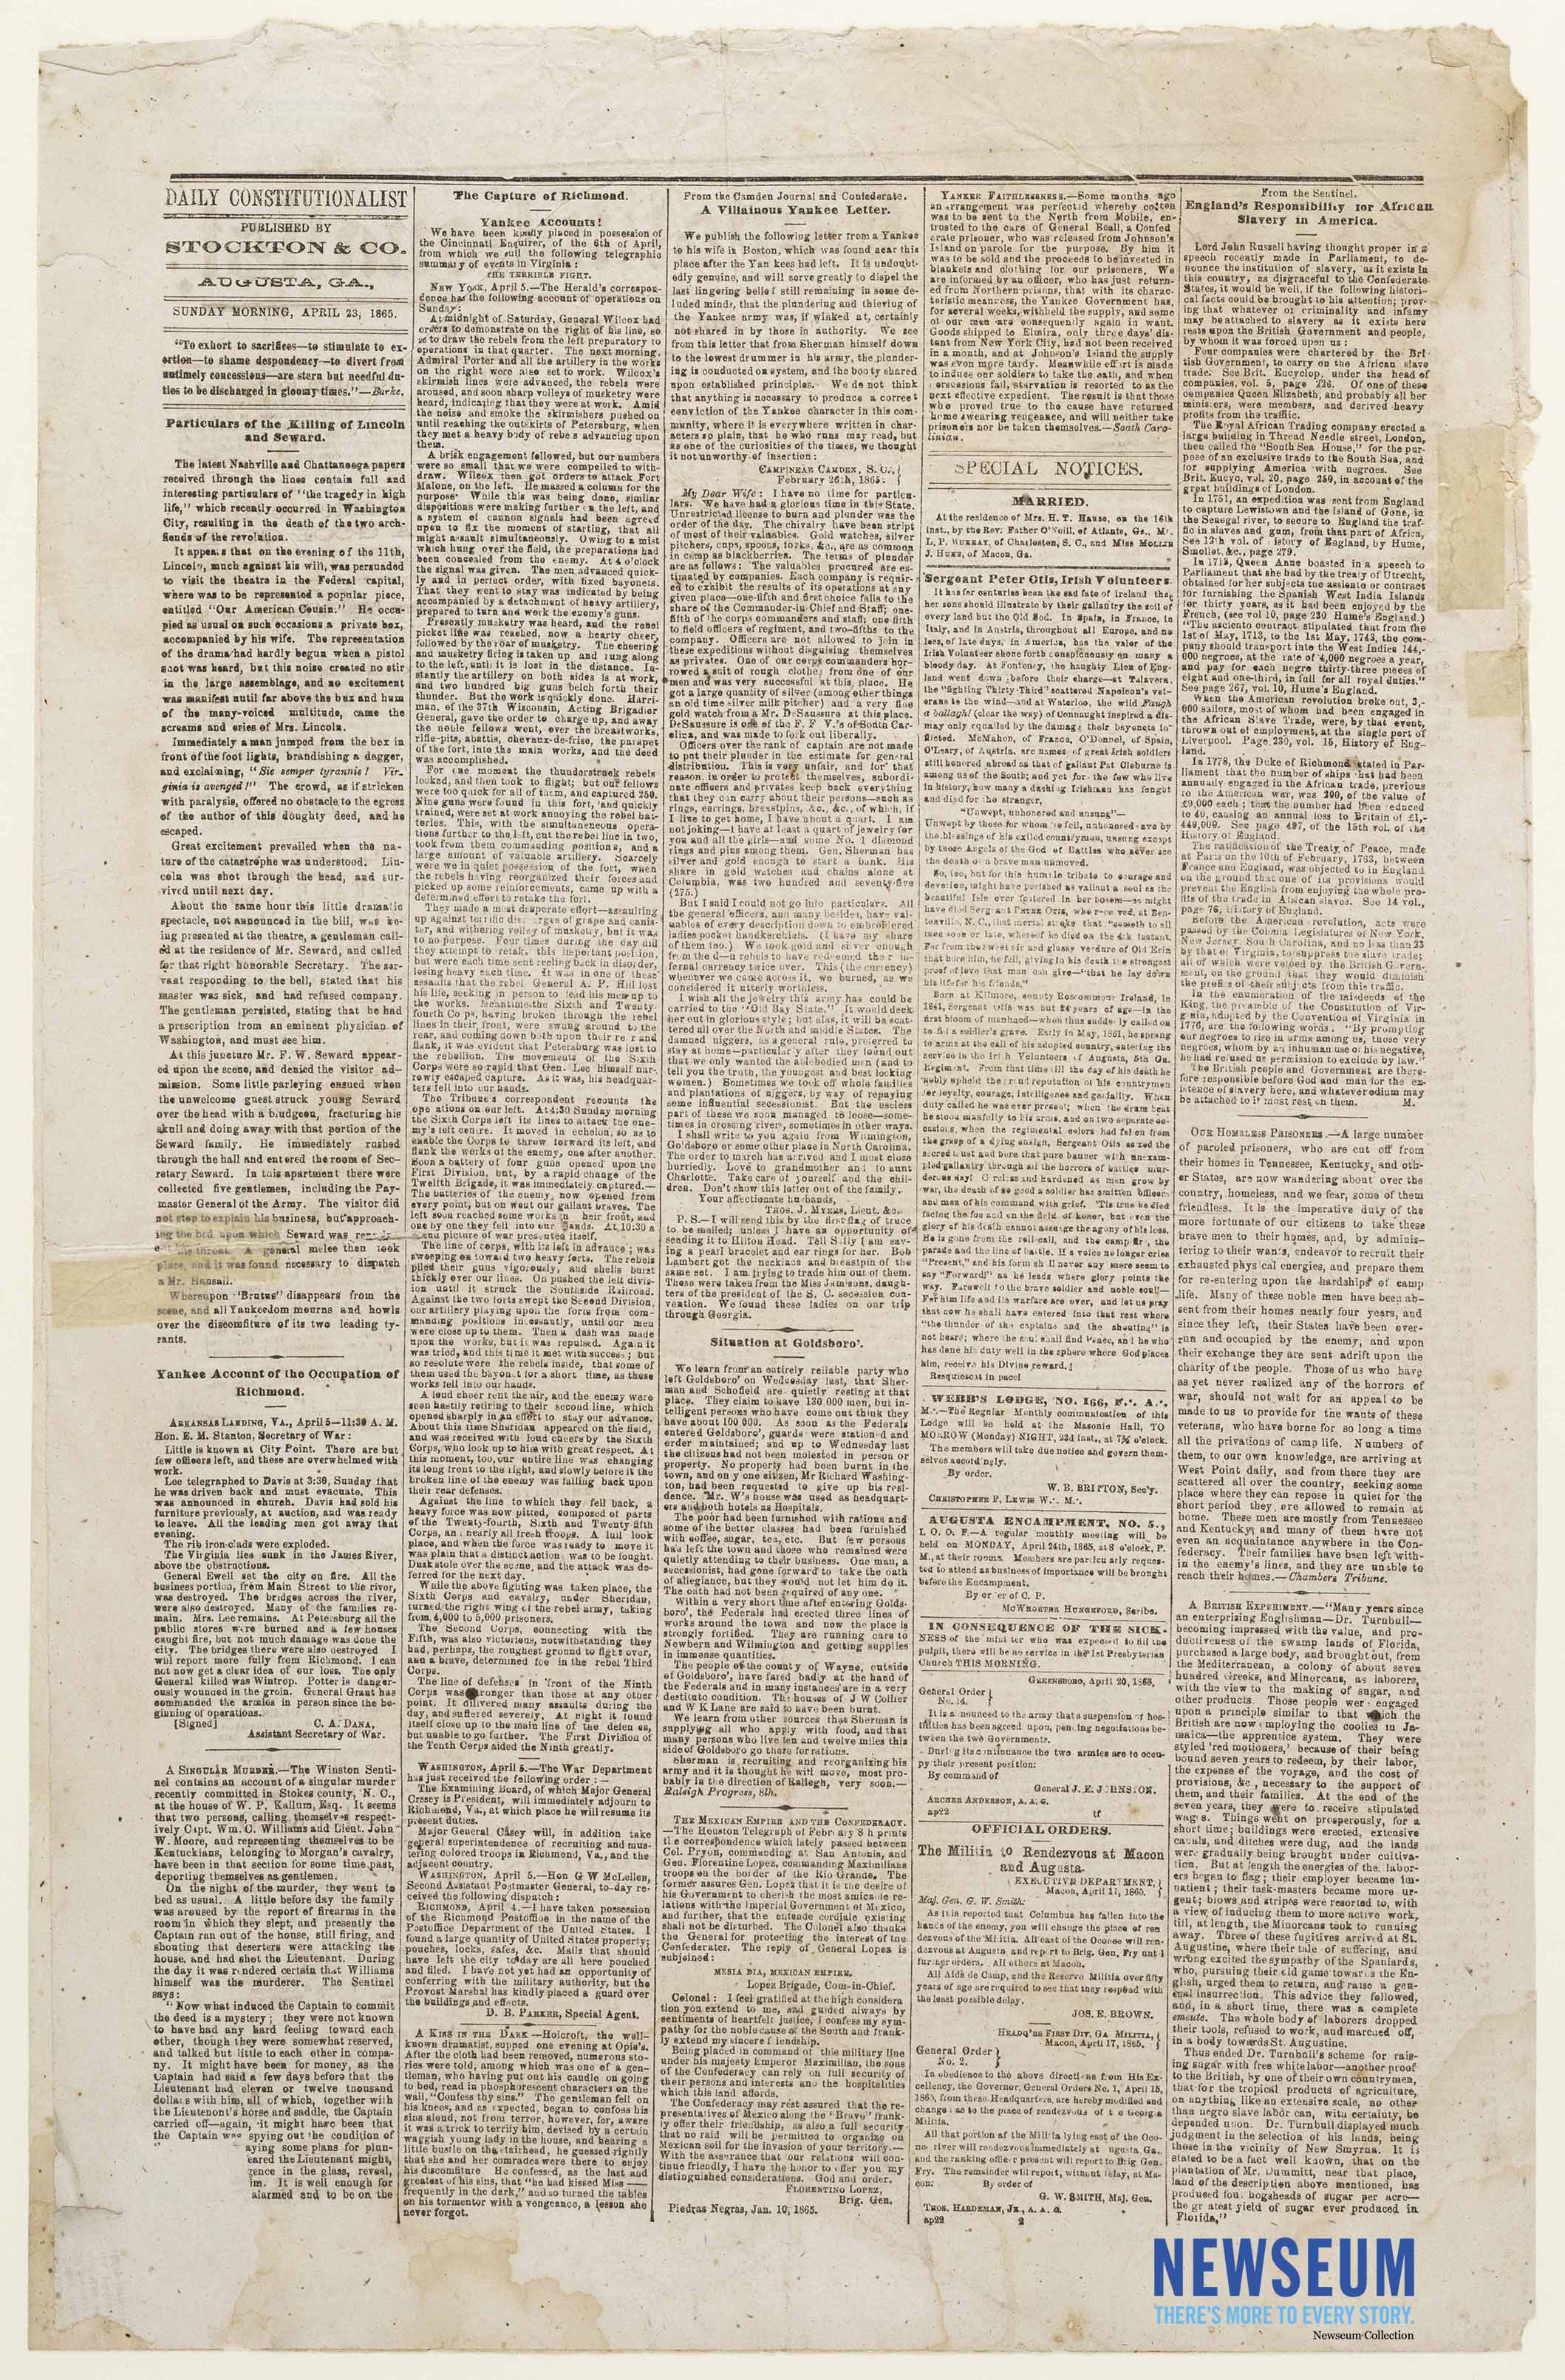 Tri-Weekly Constitutionalist, April 23, 1865